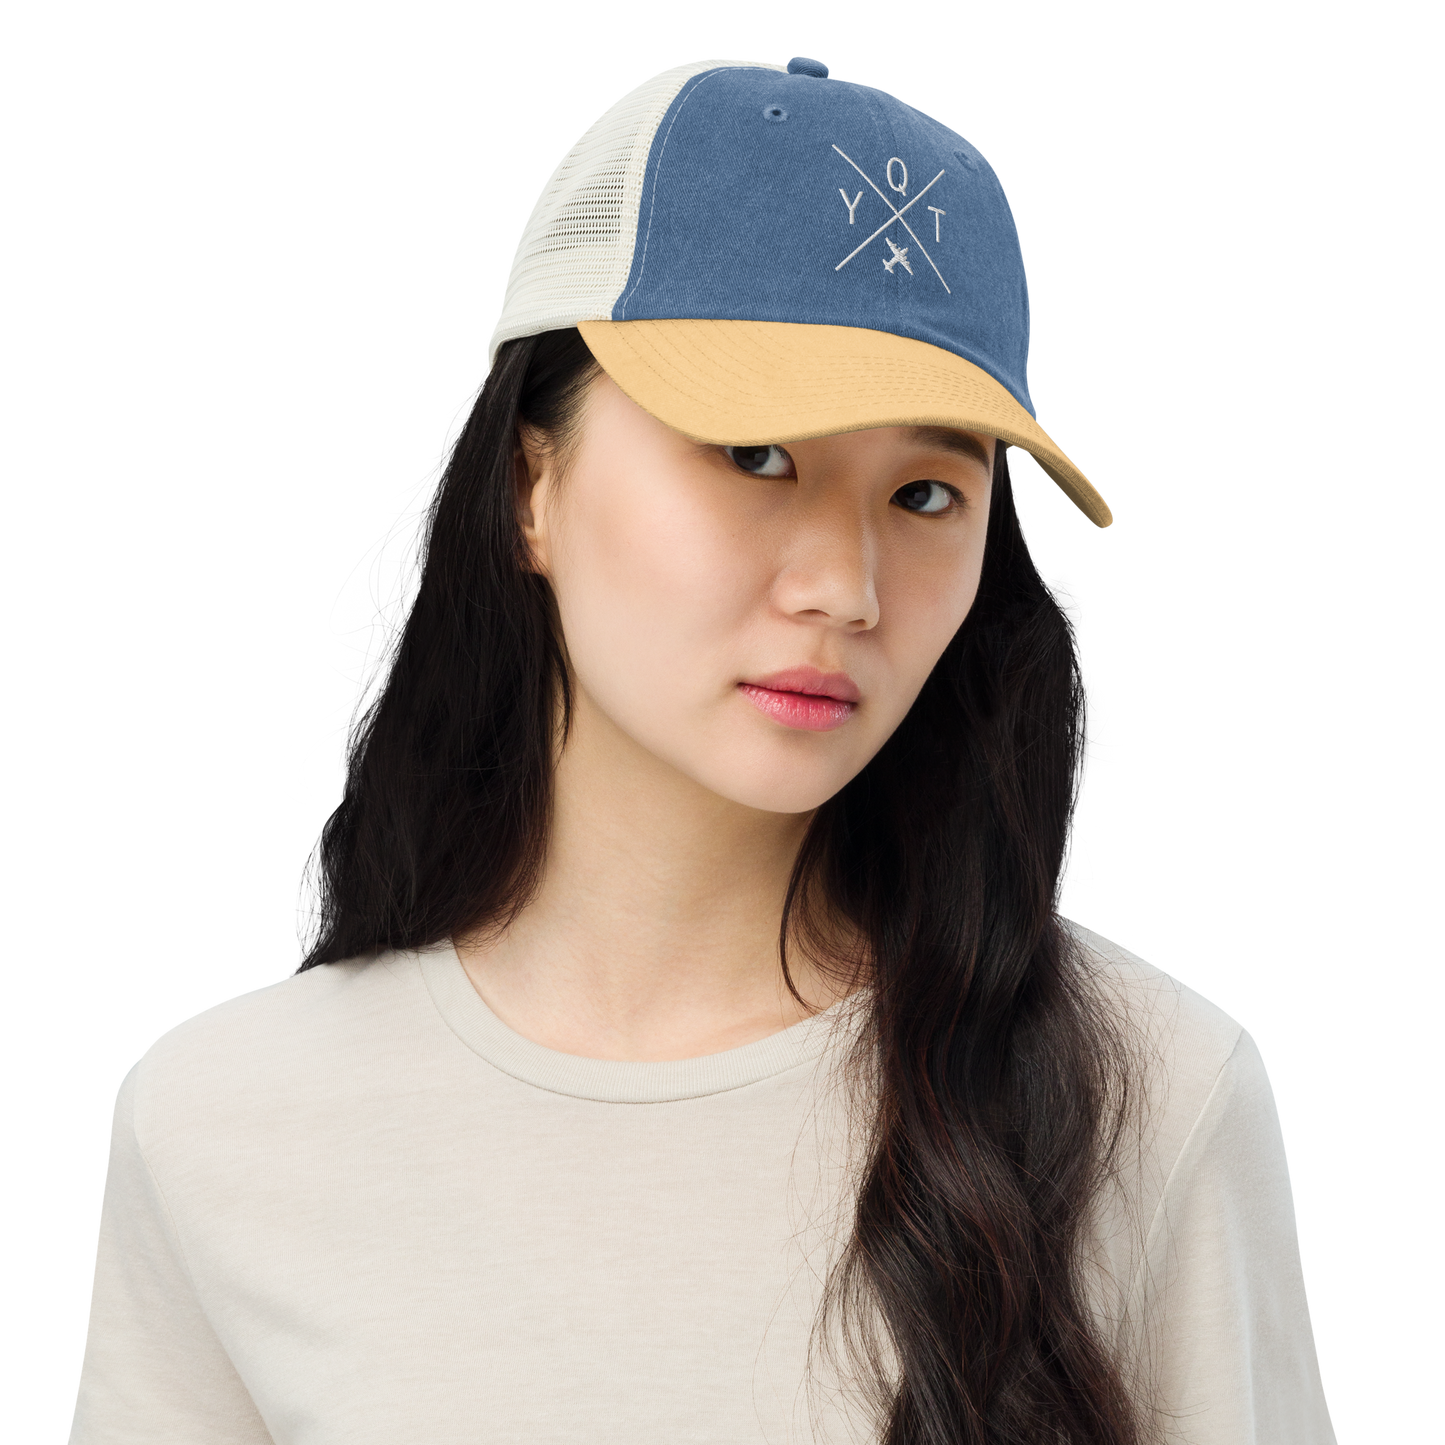 YHM Designs - YQT Thunder Bay Pigment-Dyed Trucker Cap - Crossed-X Design with Airport Code and Vintage Propliner - White Embroidery - Image 03